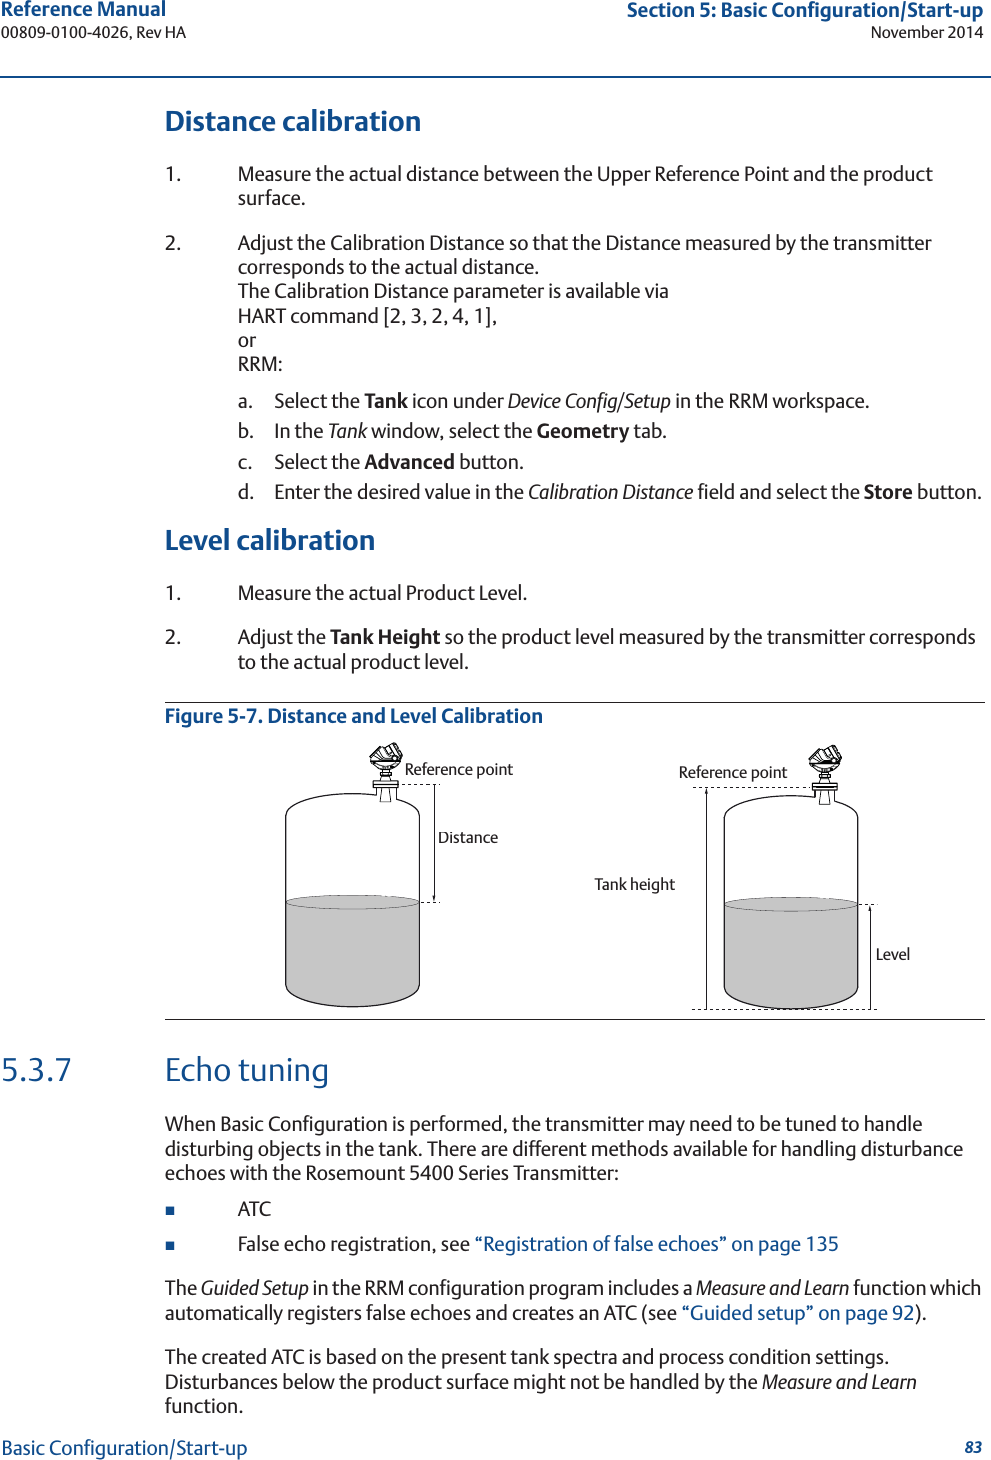 83Reference Manual 00809-0100-4026, Rev HASection 5: Basic Configuration/Start-upNovember 2014Basic Configuration/Start-upDistance calibration1. Measure the actual distance between the Upper Reference Point and the product surface.2. Adjust the Calibration Distance so that the Distance measured by the transmitter corresponds to the actual distance. The Calibration Distance parameter is available via HART command [2, 3, 2, 4, 1],orRRM: a. Select the Tank icon under Device Config/Setup in the RRM workspace.b. In the Tank window, select the Geometry tab.c. Select the Advanced button.d. Enter the desired value in the Calibration Distance field and select the Store button.Level calibration1. Measure the actual Product Level.2. Adjust the Tank Height so the product level measured by the transmitter corresponds to the actual product level.Figure 5-7. Distance and Level Calibration5.3.7 Echo tuningWhen Basic Configuration is performed, the transmitter may need to be tuned to handle disturbing objects in the tank. There are different methods available for handling disturbance echoes with the Rosemount 5400 Series Transmitter:ATCFalse echo registration, see “Registration of false echoes” on page 135The Guided Setup in the RRM configuration program includes a Measure and Learn function which automatically registers false echoes and creates an ATC (see “Guided setup” on page 92).The created ATC is based on the present tank spectra and process condition settings. Disturbances below the product surface might not be handled by the Measure and Learn function.Reference pointDistanceReference pointTank heightLevel